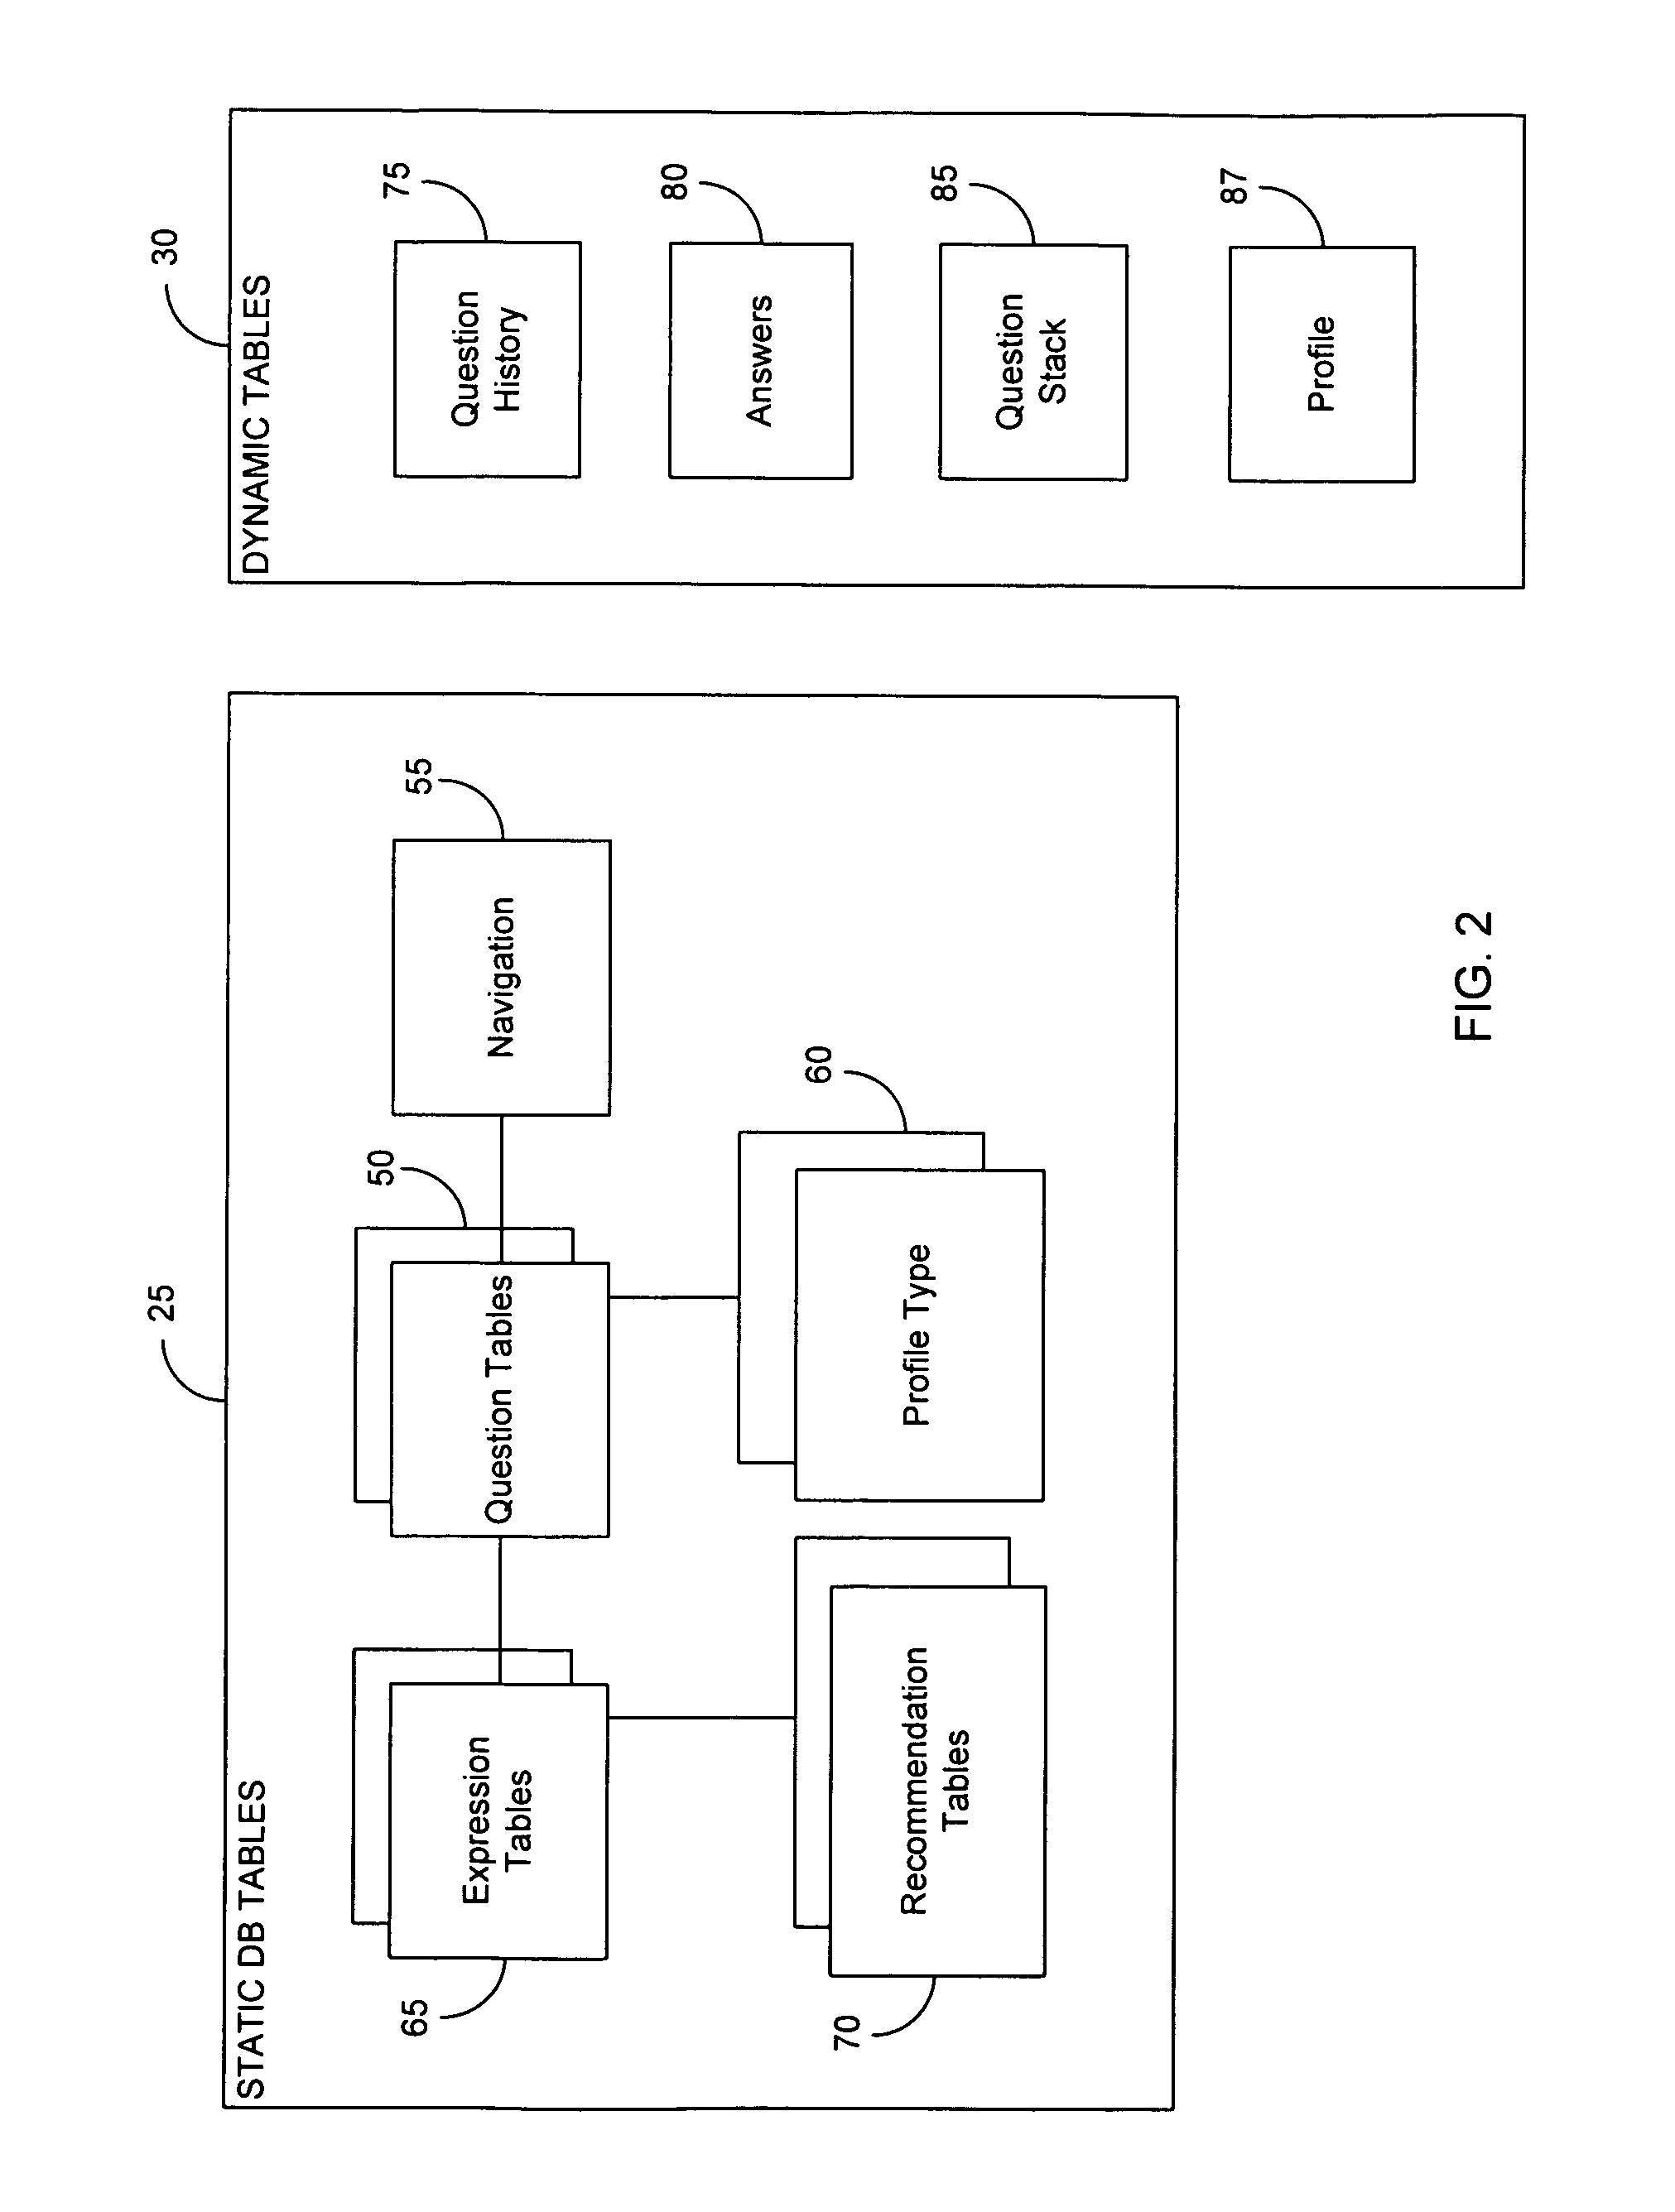 Extensible configuration engine system and method